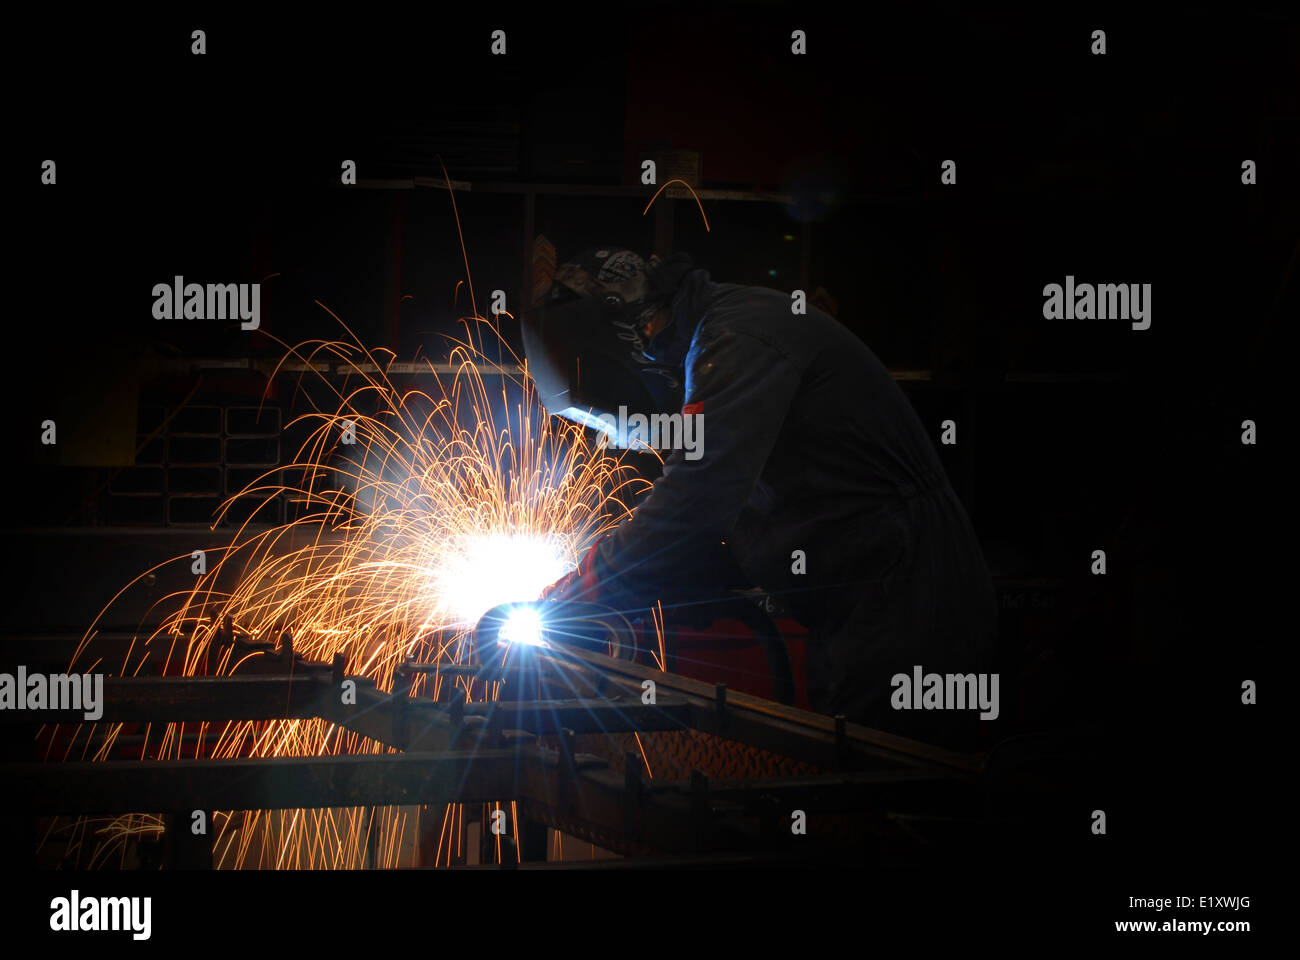 Man welding in the construction industry Stock Photo